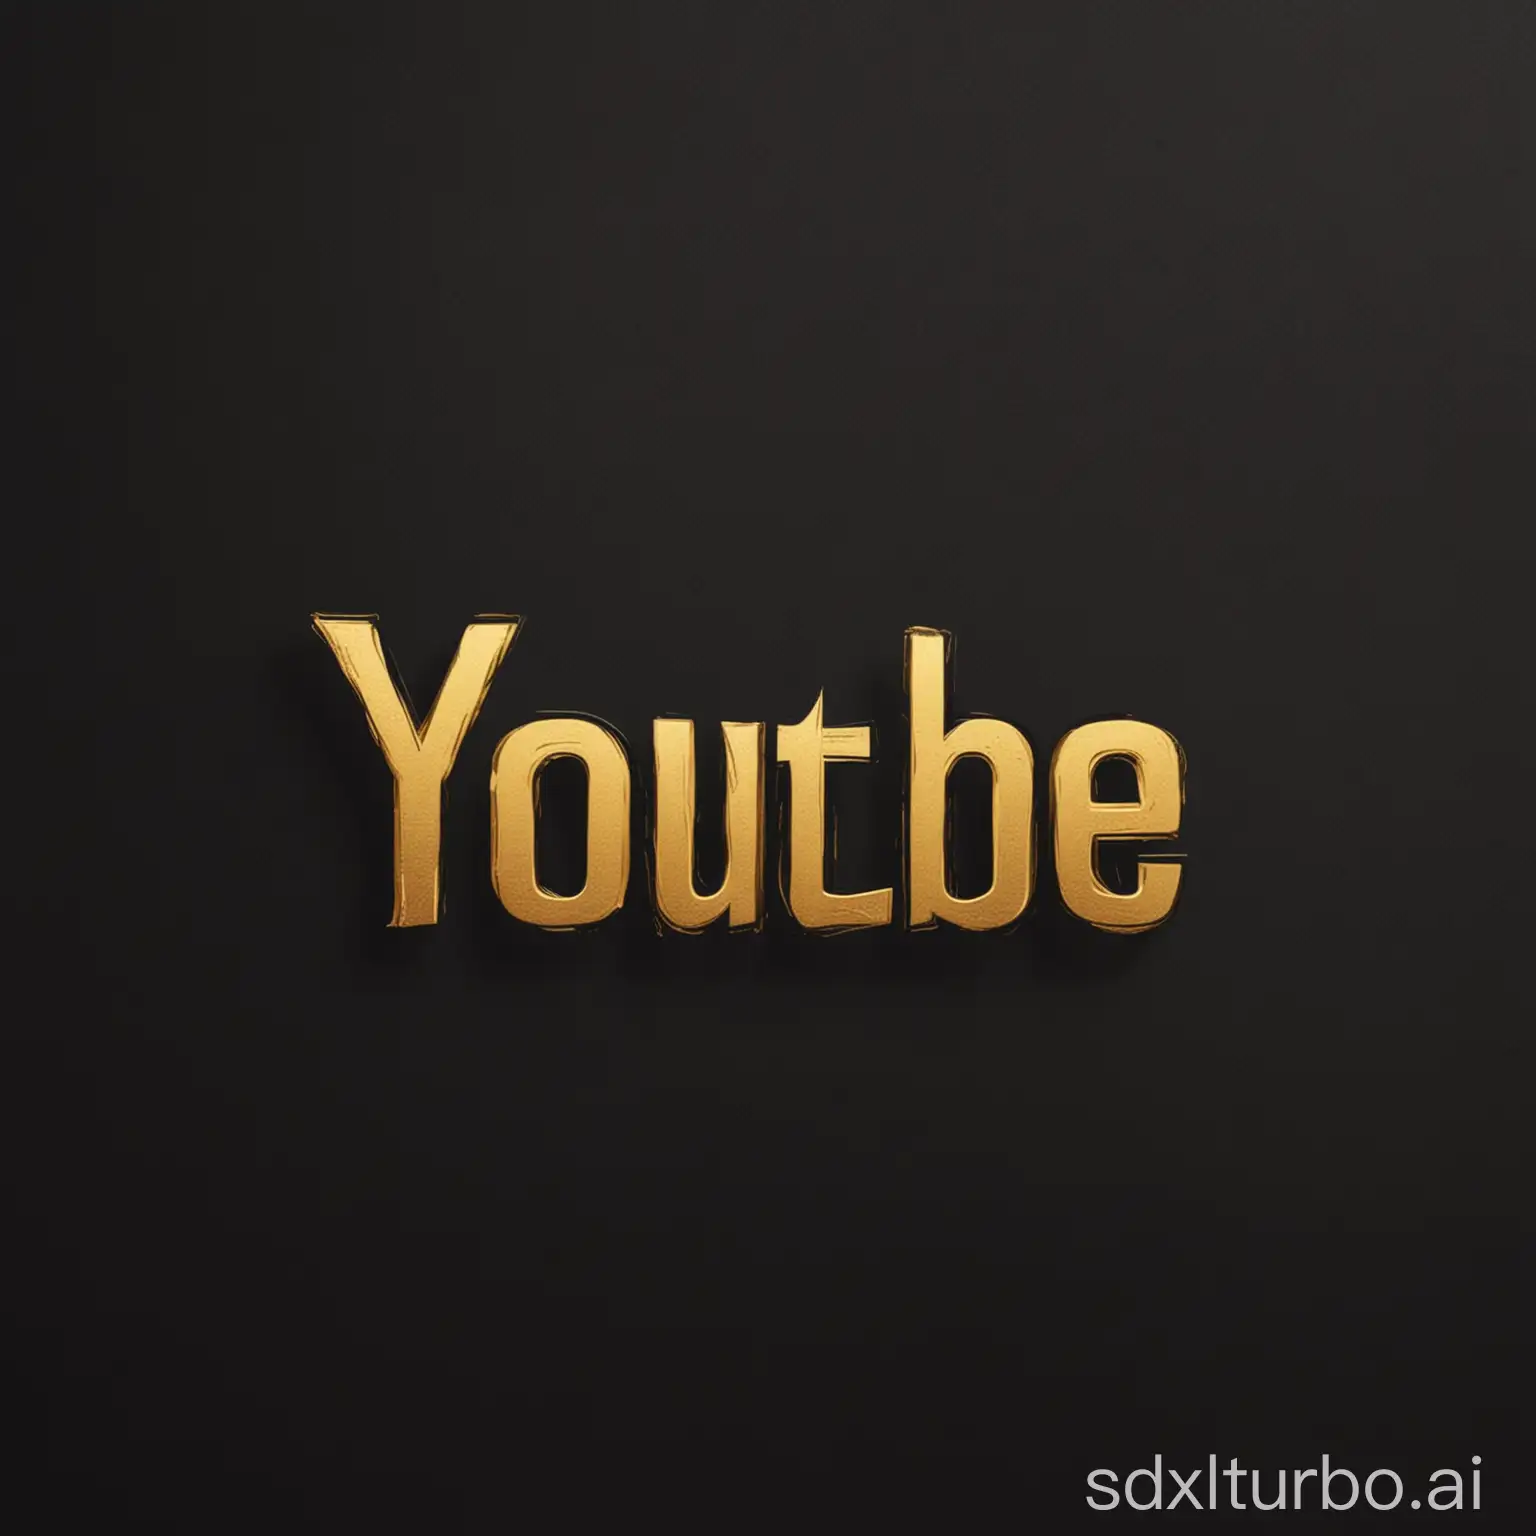 Create a logo for a YouTube brand that deals with practical adult education. The colours included are black and gold. It should be simple and engaging